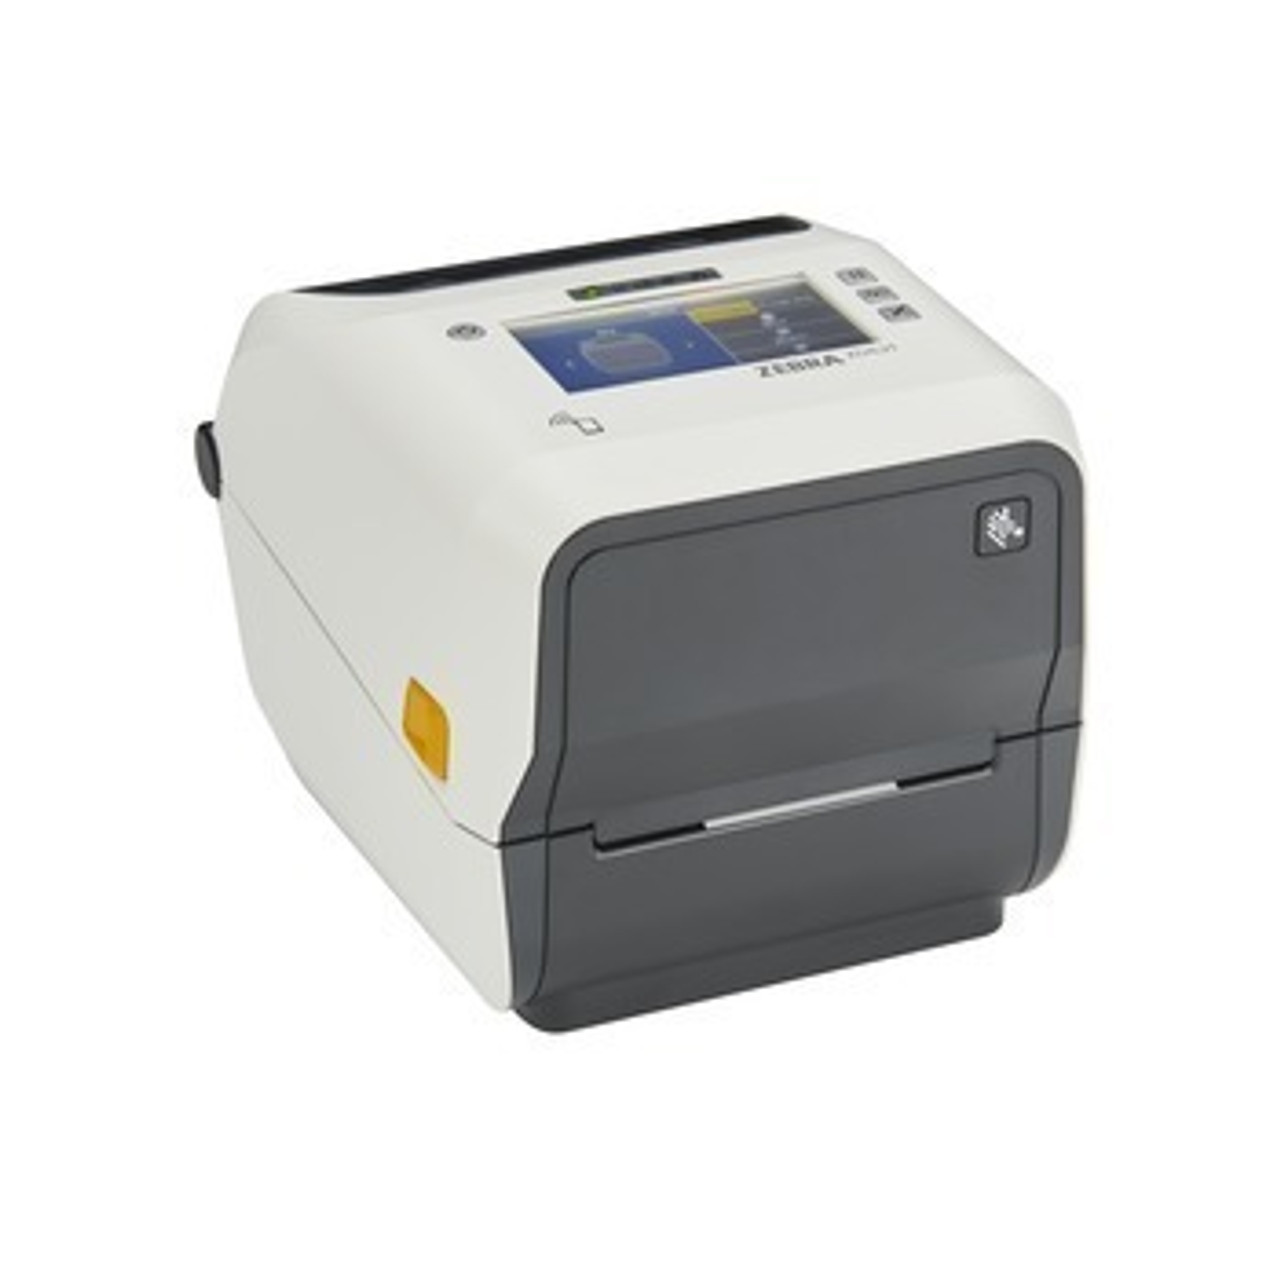 ZEBRA ZD621 Thermal Transfer Desktop Printer Color Touch LCD 203 dpi Print Width 4-inch USB Serial Ethernet 802.11ac with Cutter ZD6A142-321L01EZ - 2